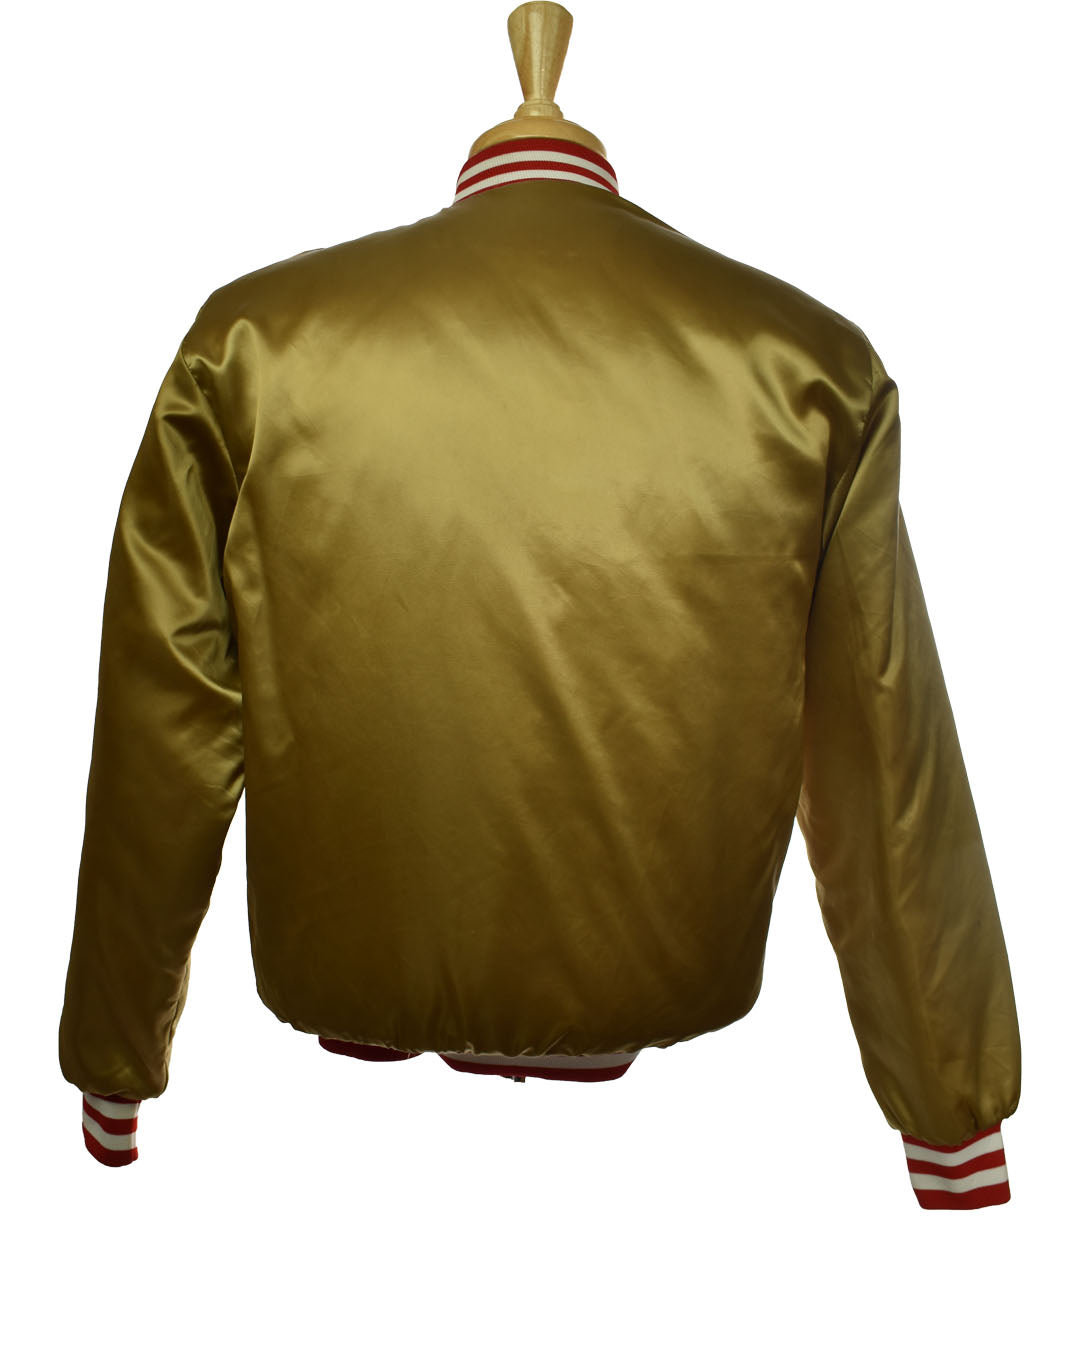 Vintage 80s San Francisco 49ers Gold Satin Bomber - Team Jacket by Swingster Made in USA Size S